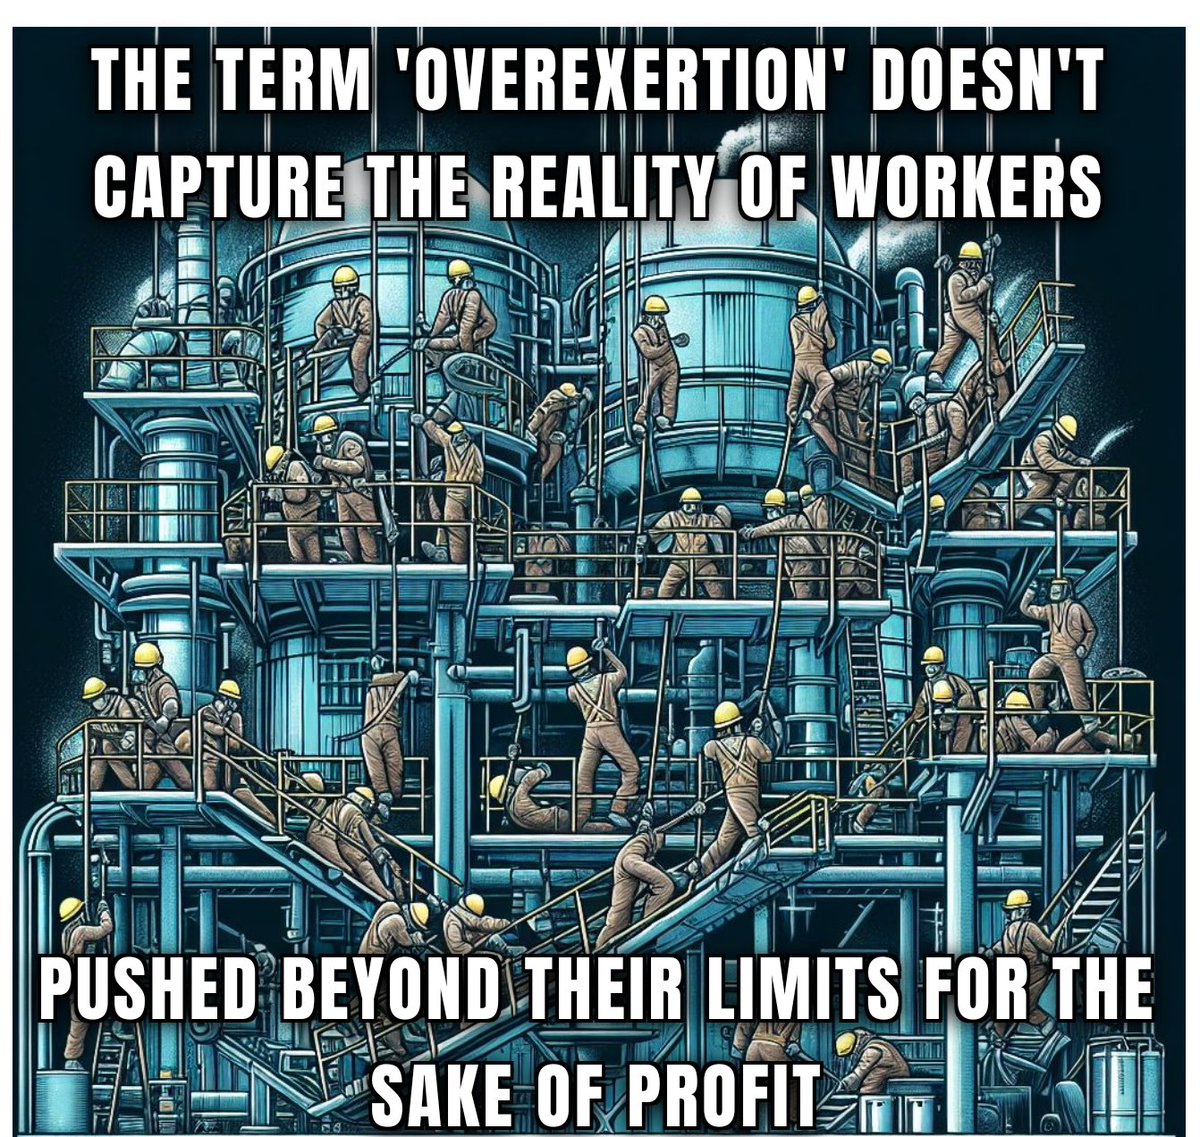 ''Overexertion' feels like an understatement when workers are pushed beyond their limits just for profit. Let's call it what it is: exploitation. It's time for change. #InjuredWorkersUnite #EndExploitation